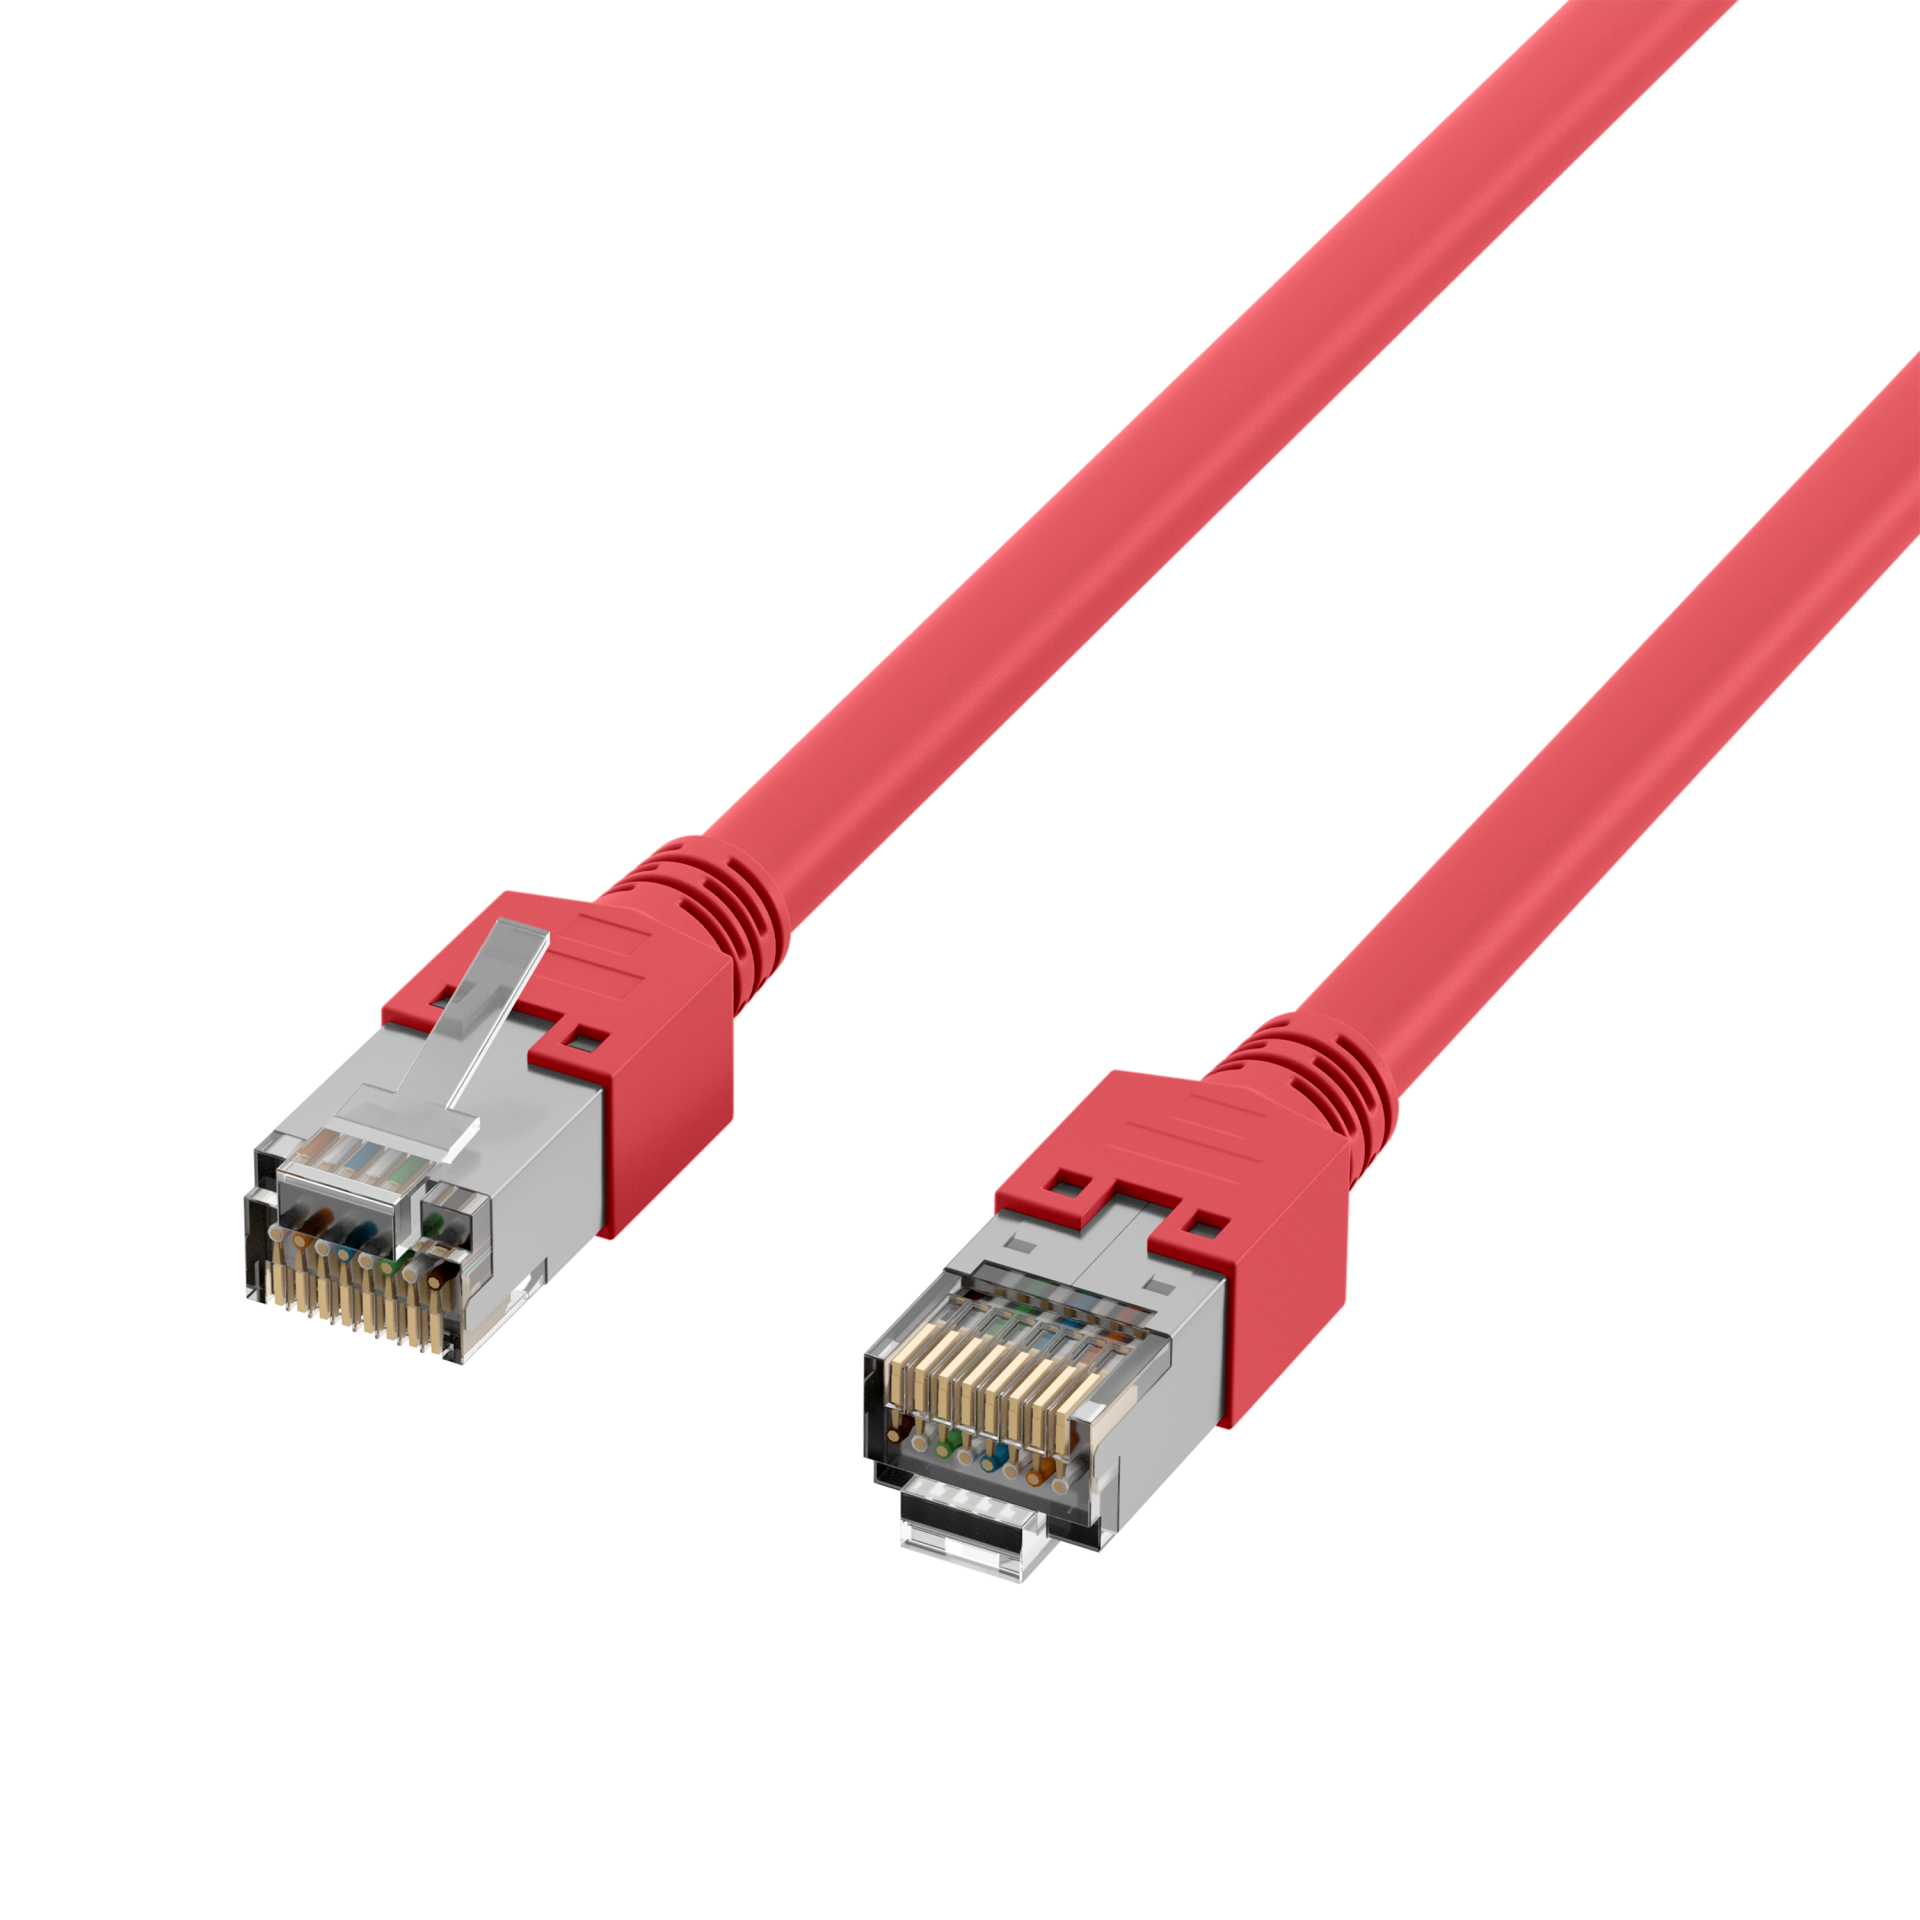 RJ45 Patch Cord Cat.5e S/UTP PVCDätwyler 5502 TM11 red 2m